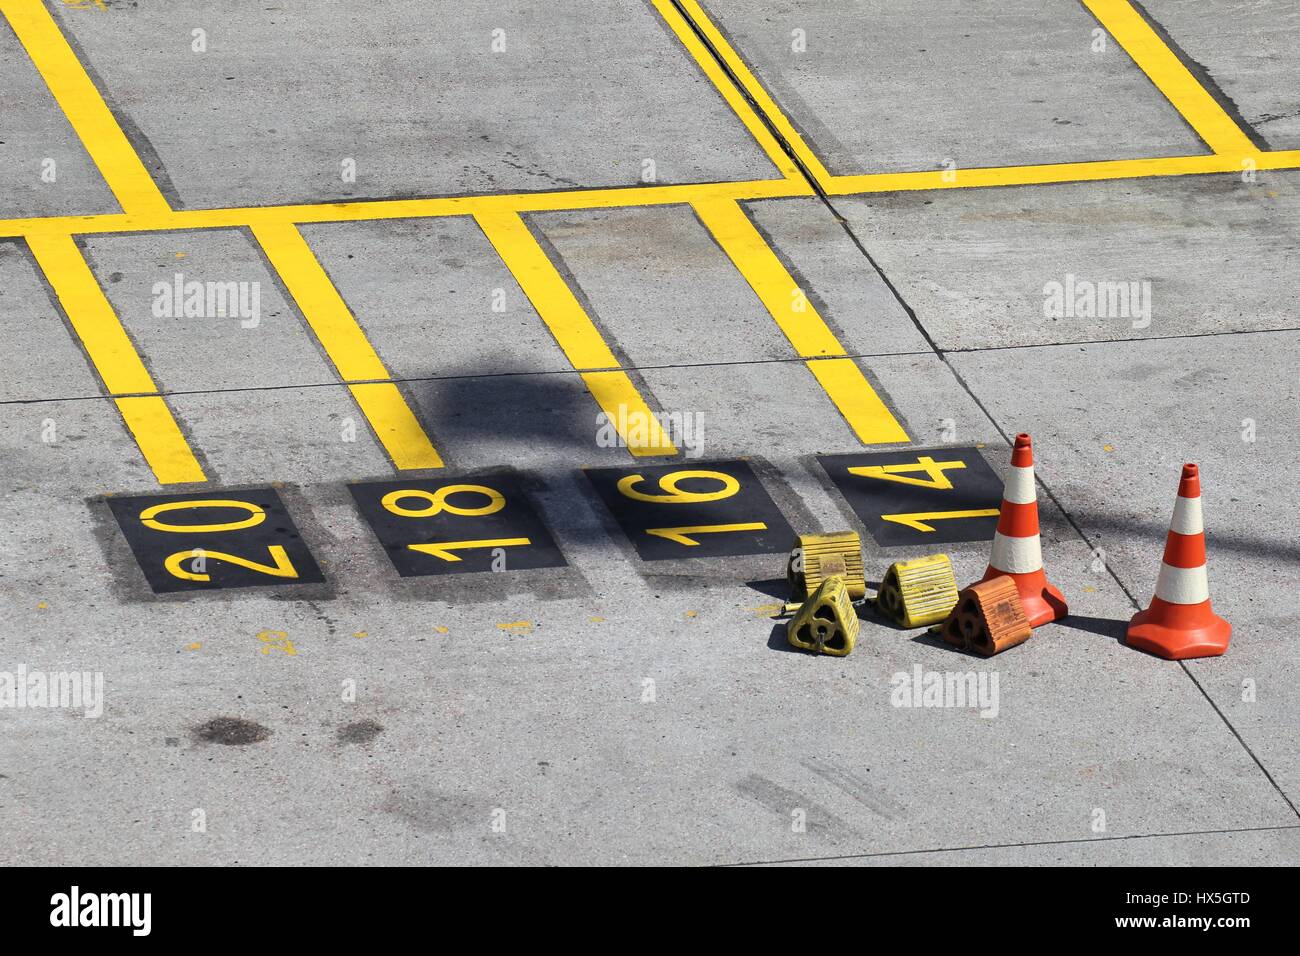 parking position for airliners at large airport Stock Photo